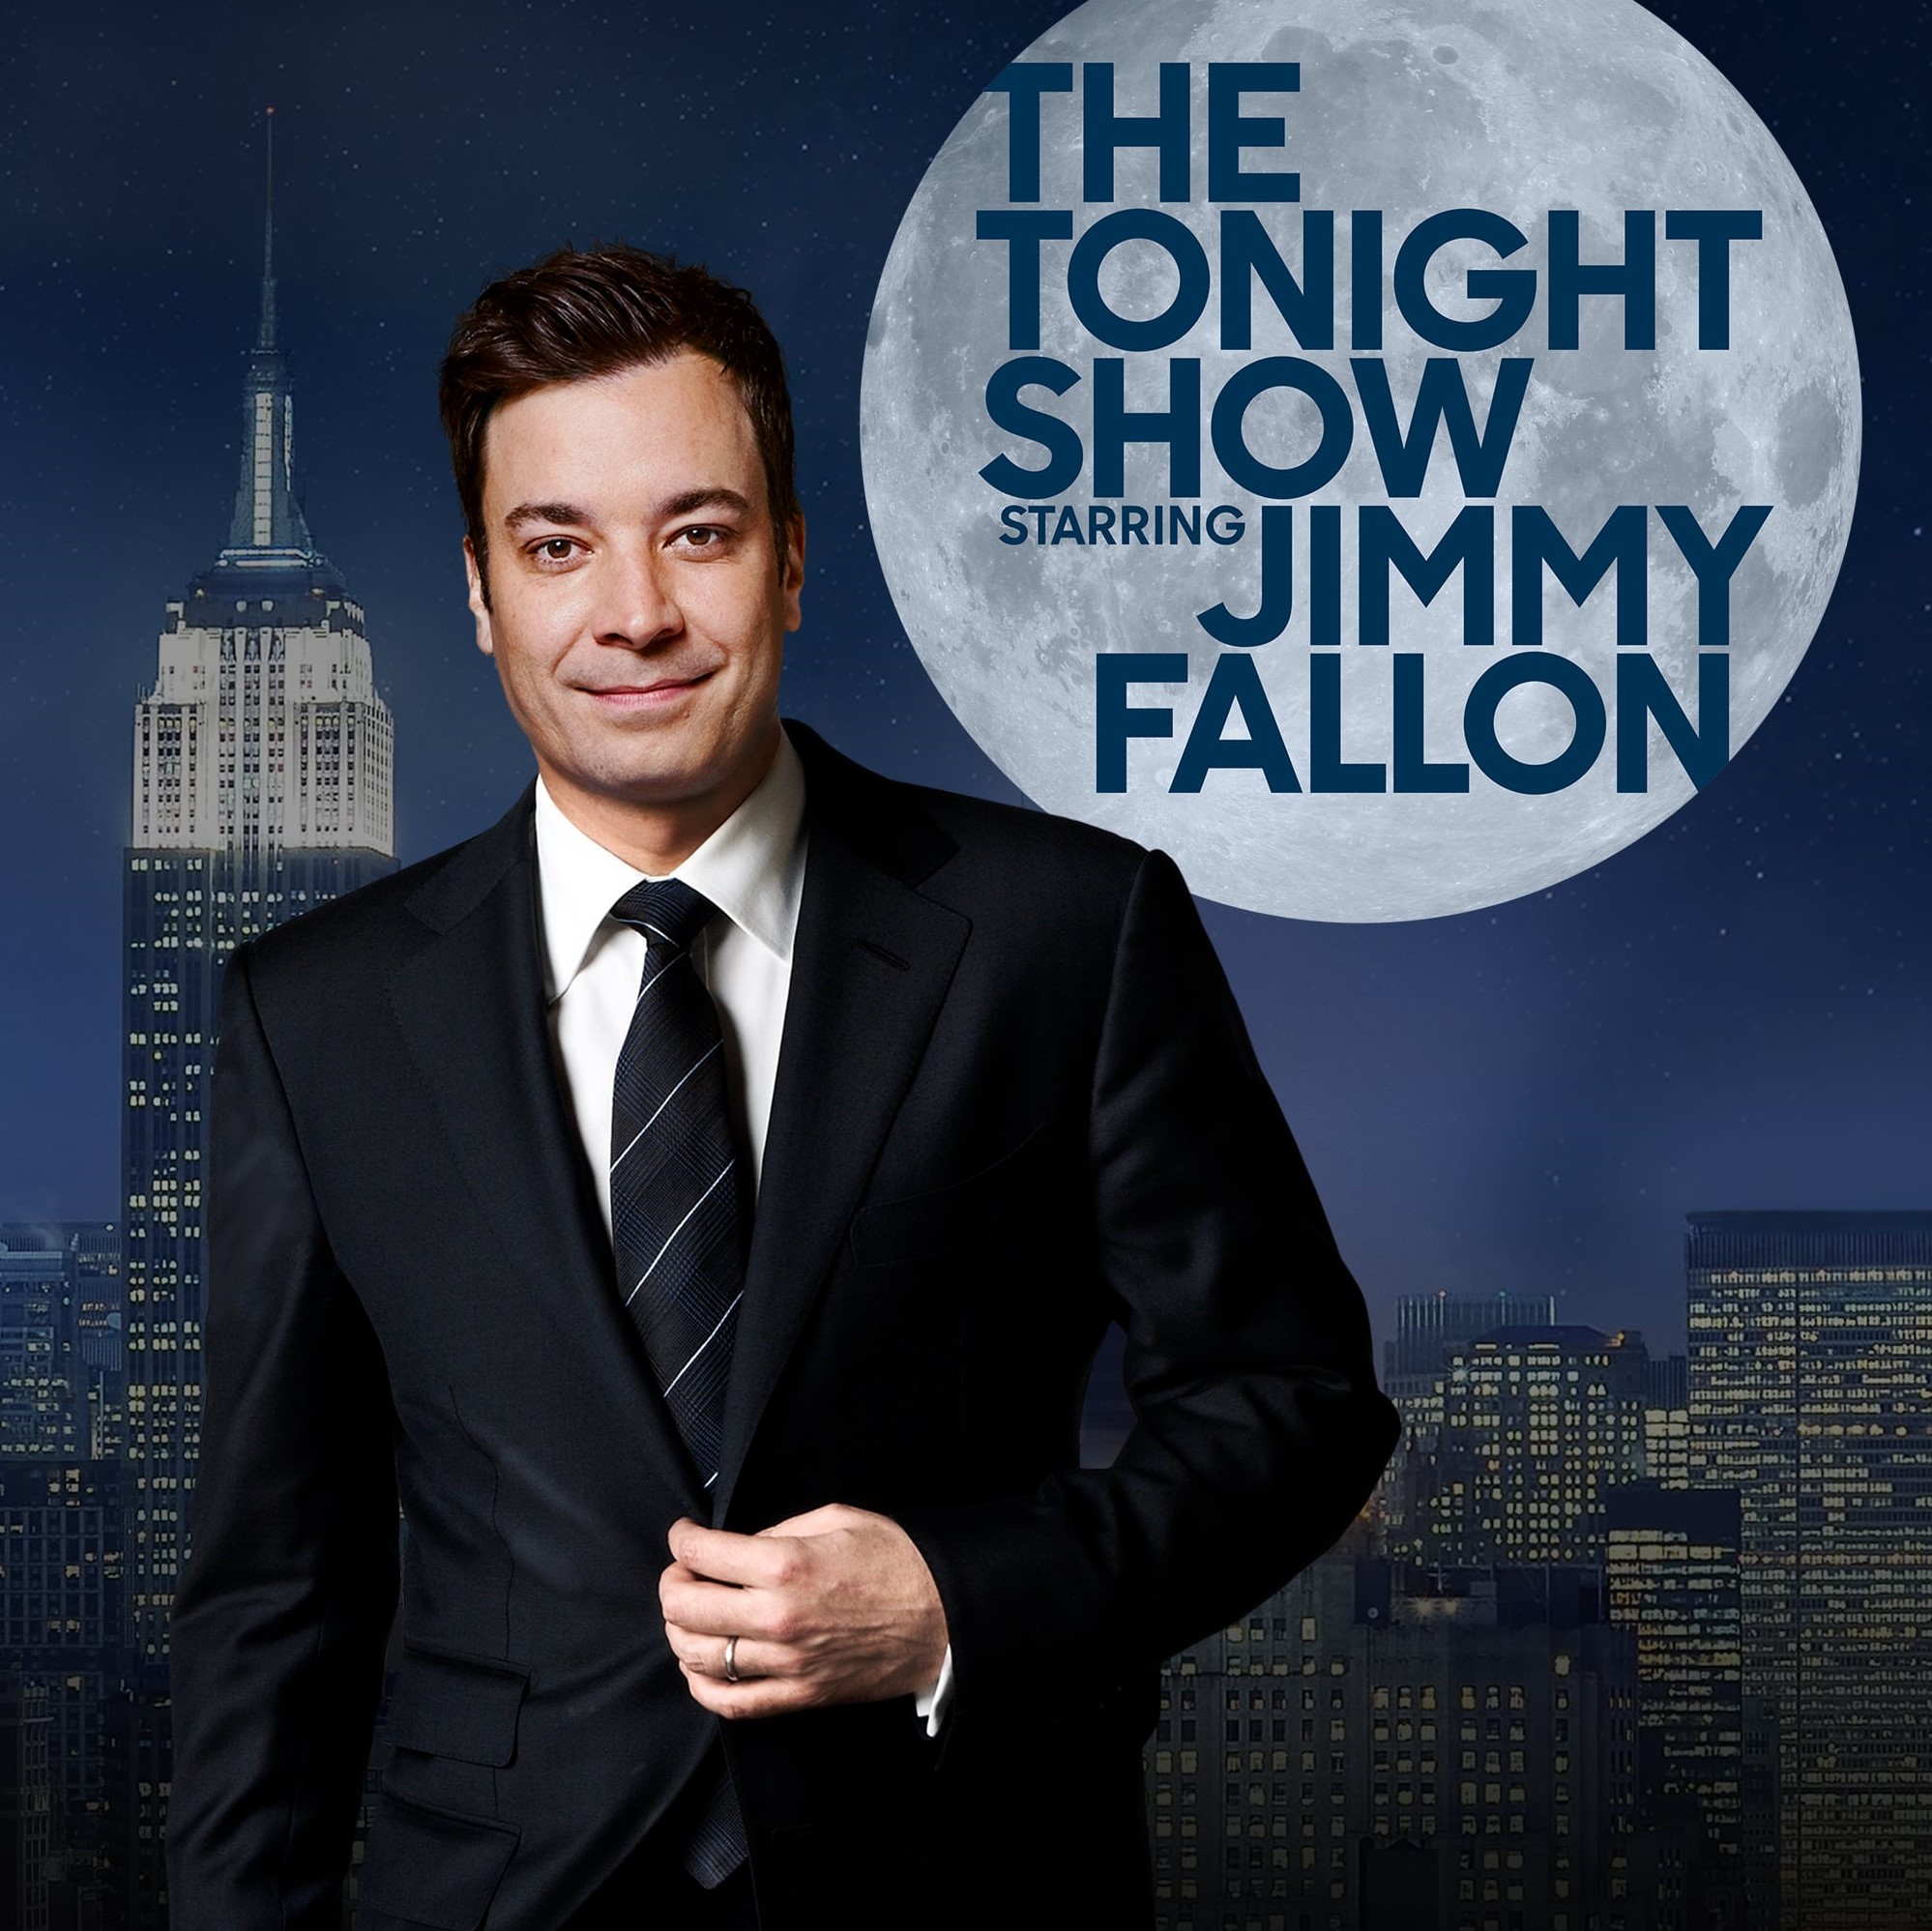 The Tonight Show Starring Jimmy Fallon television series on NBC